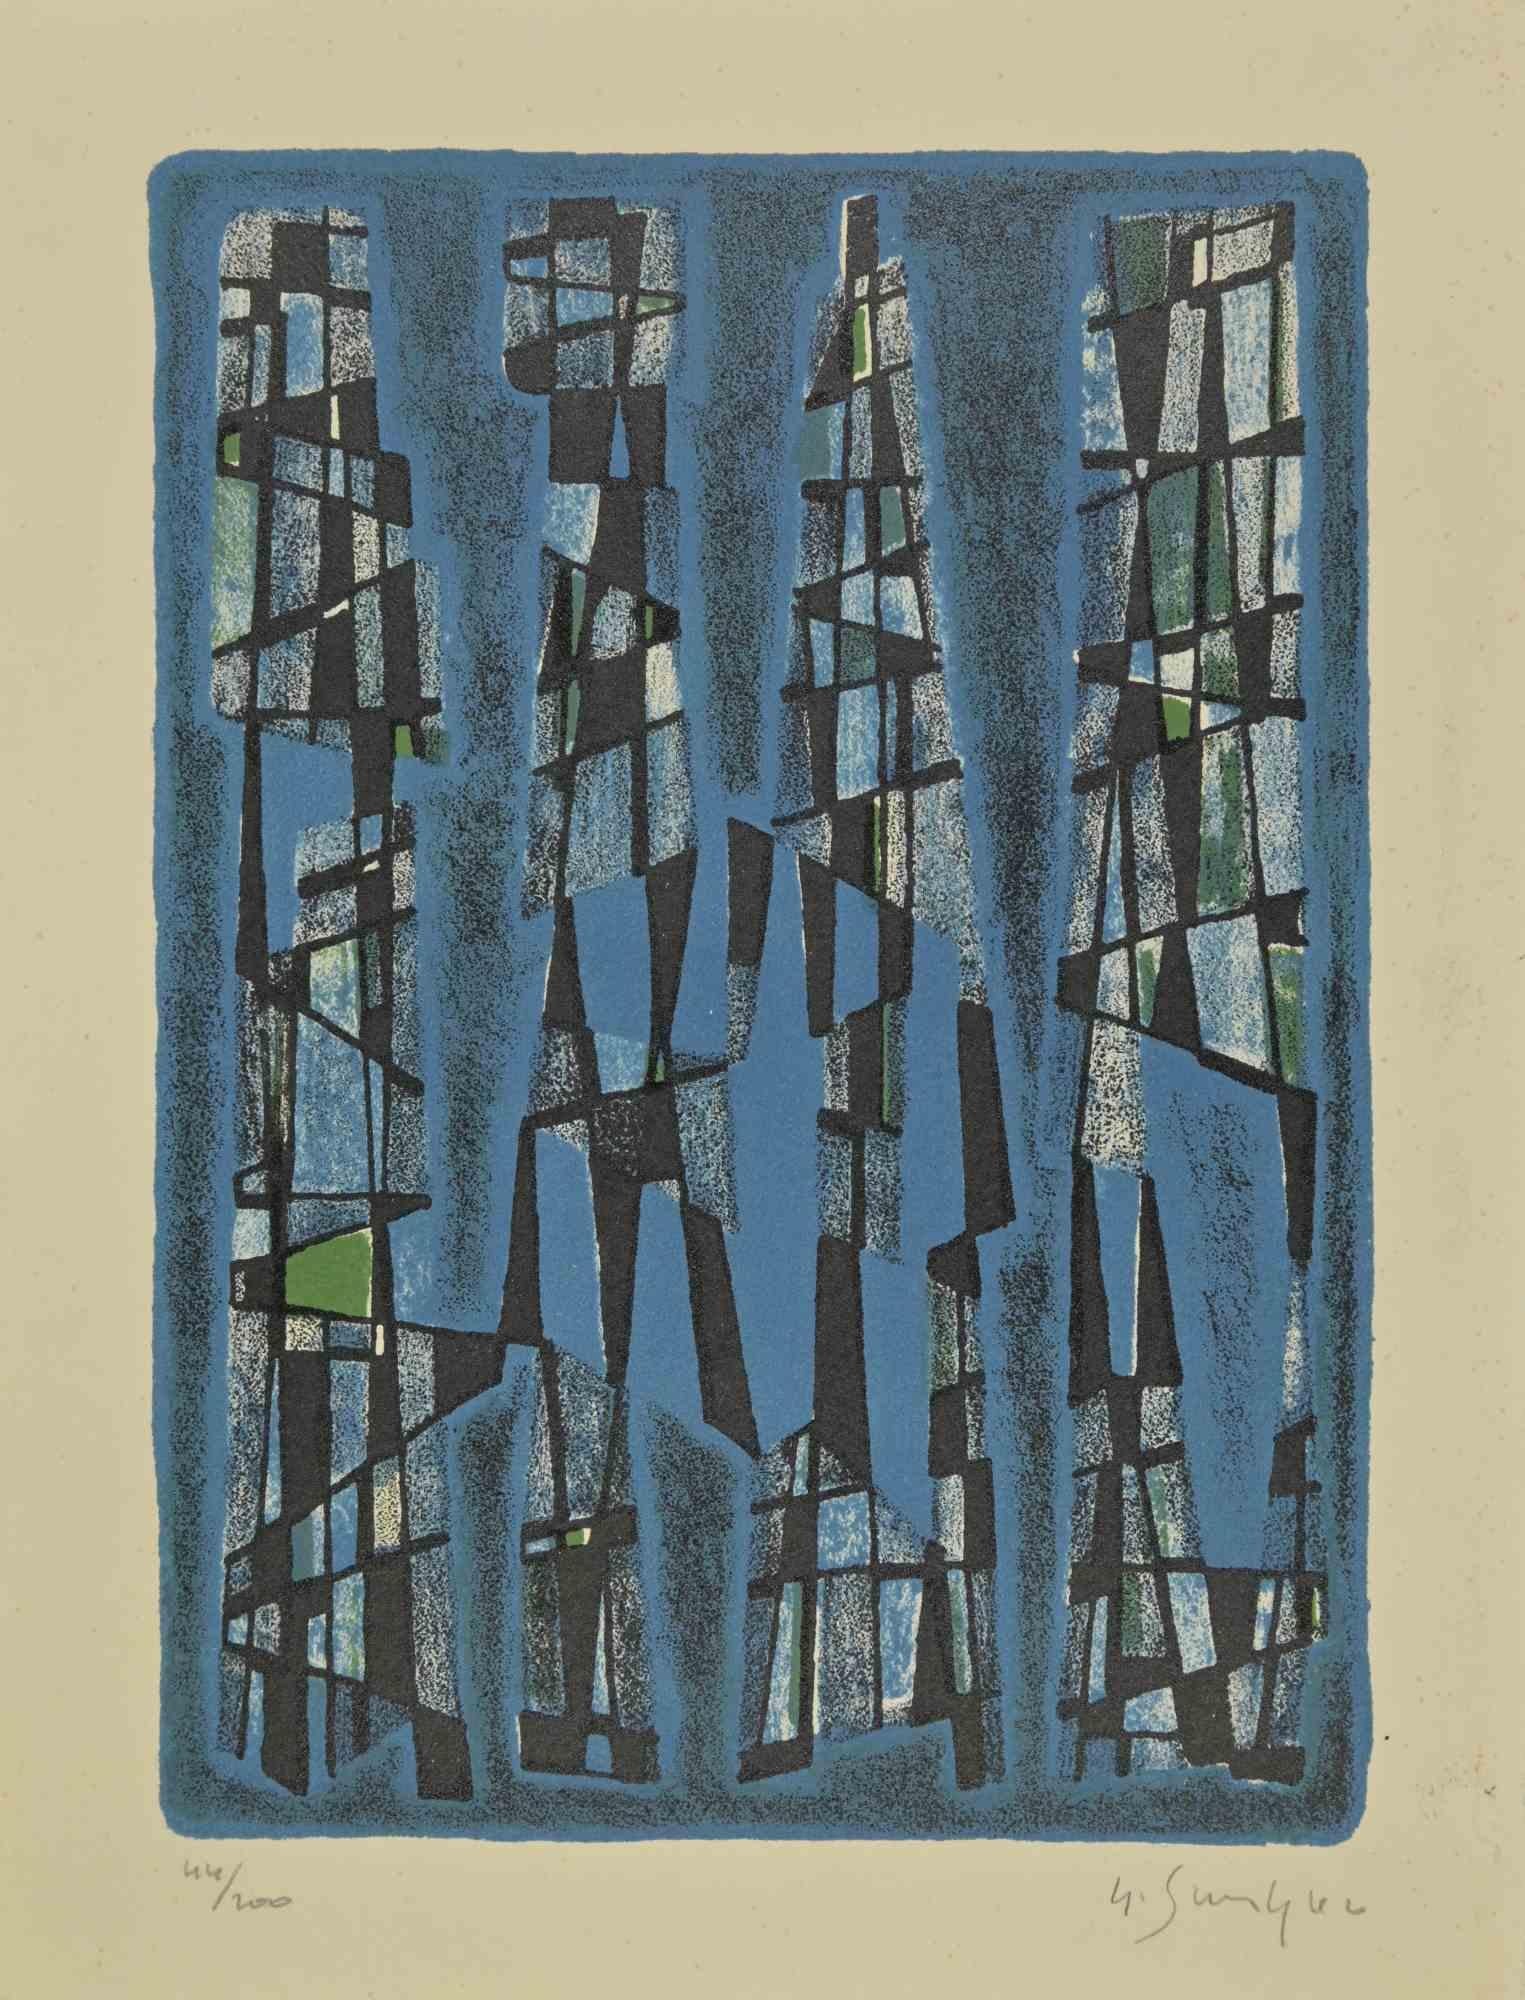 Untitled - Lithograph by Gustave Singier - 1960s